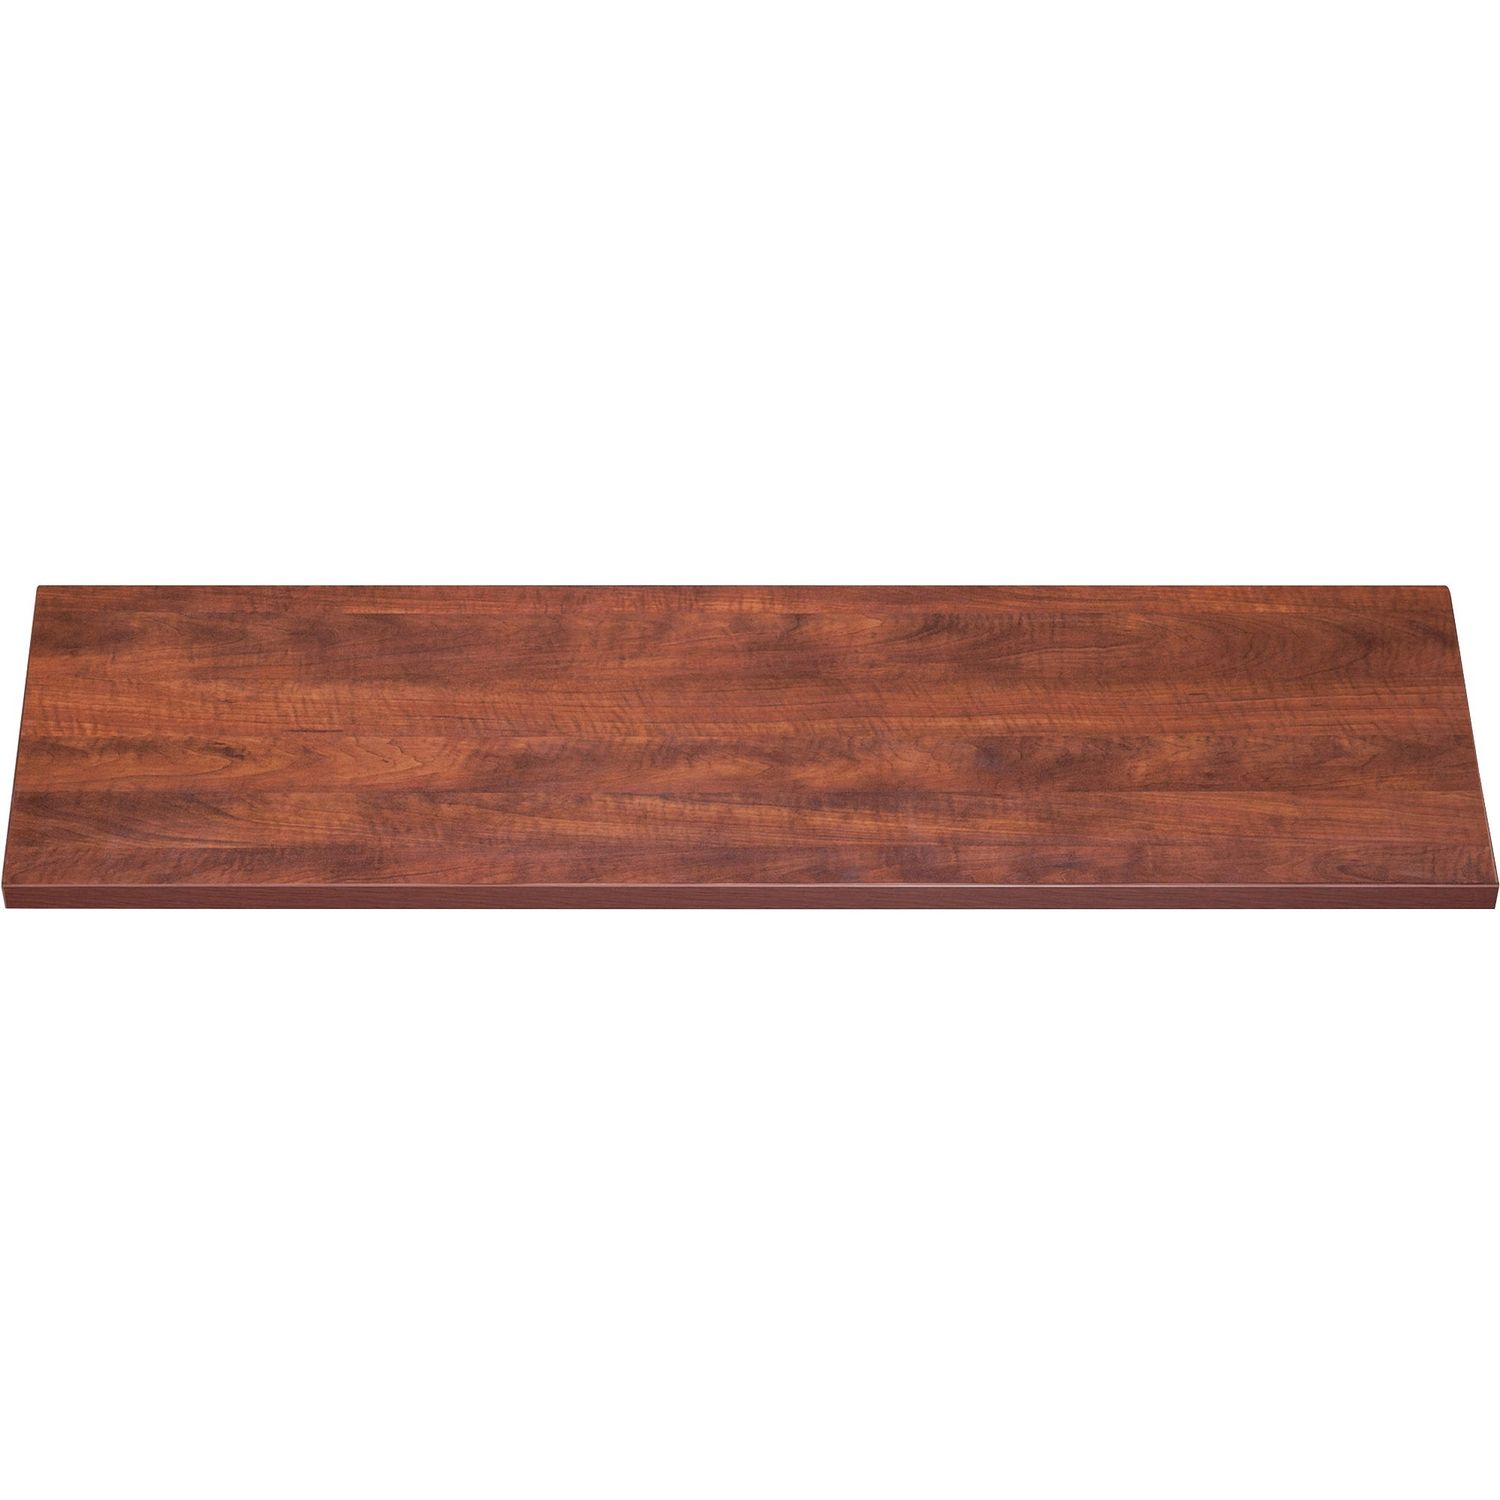 36" Lateral Files Laminate Tops 36" Width x 18.6" Depth x 1" Height x 1" Thickness, Cherry